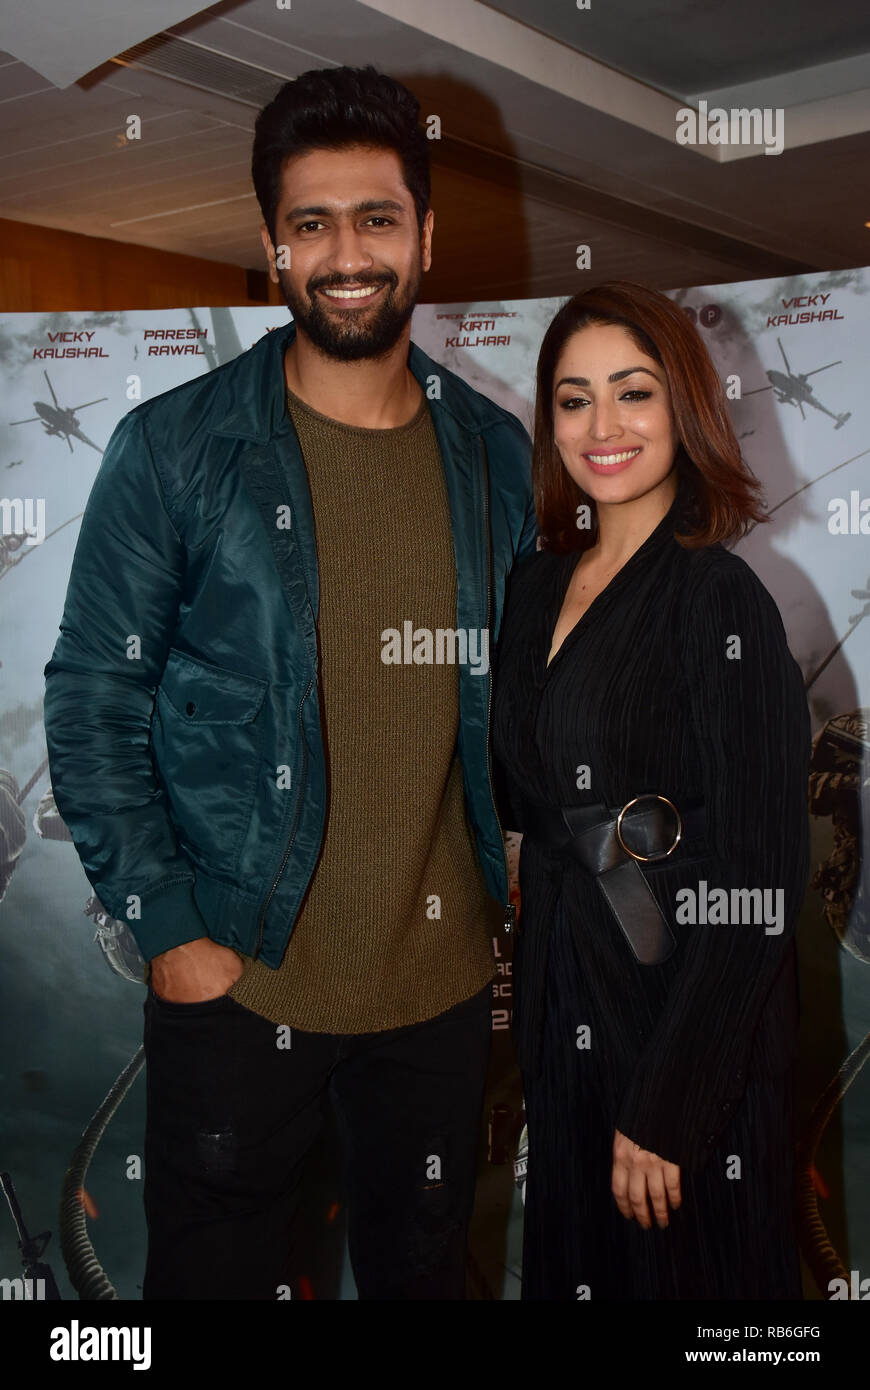 Mumbai, India. 7th Jan, 2019. Actor Vicky Kaushal with actress Yami Gautam are seen during the promotion of their upcoming film 'URI: The Surgical Strike' at Sun and Sand Hotel, Juhu in Mumbai. The film is based on the true events of 2016, when Indian Army avenged a deadly terrorist attack by carrying out a surgical strike. Credit: Azhar Khan/SOPA Images/ZUMA Wire/Alamy Live News Stock Photo